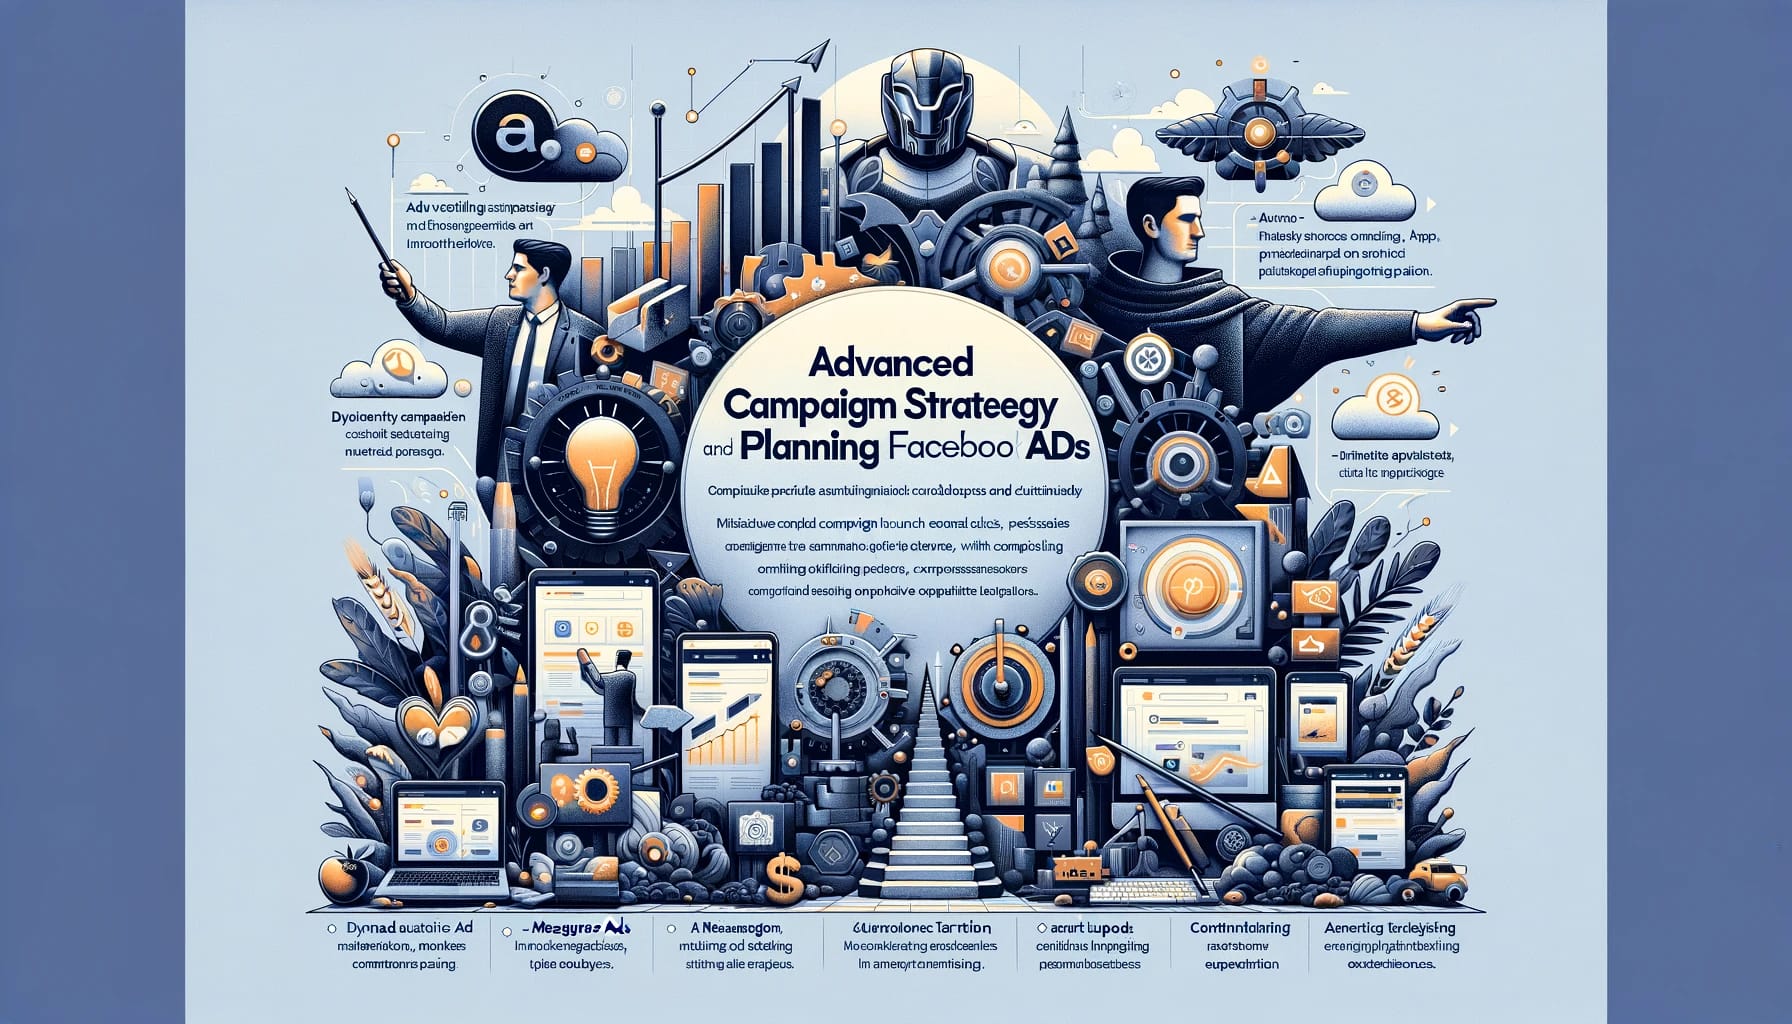 Image depicting advanced campaign strategy and planning for Facebook Ads, featuring elements of data analysis, audience targeting, and innovative ad features.